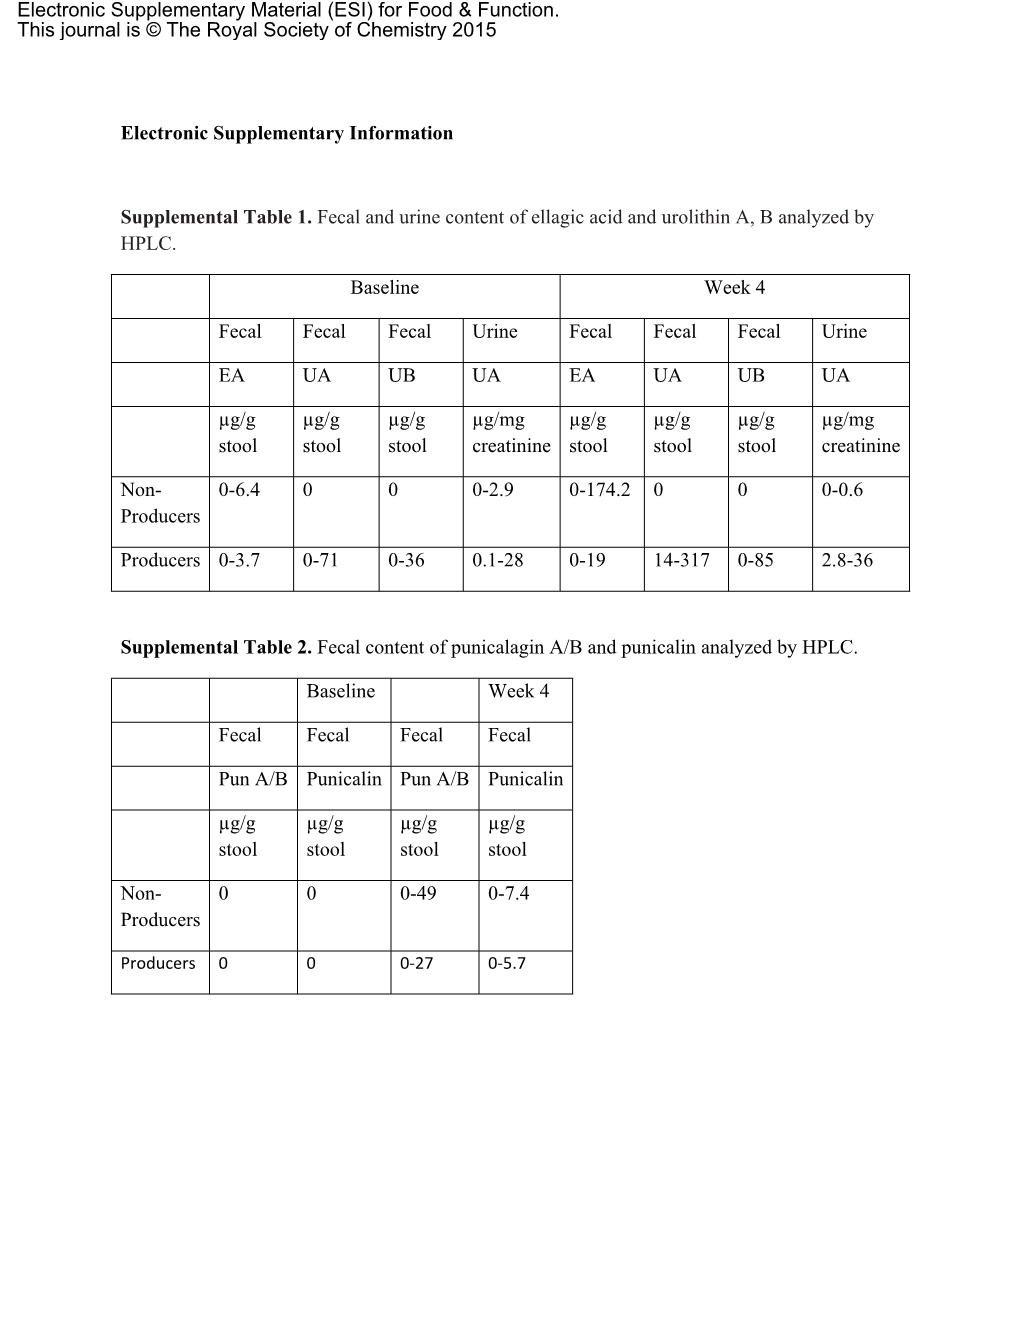 Electronic Supplementary Information Supplemental Table 1. Fecal And